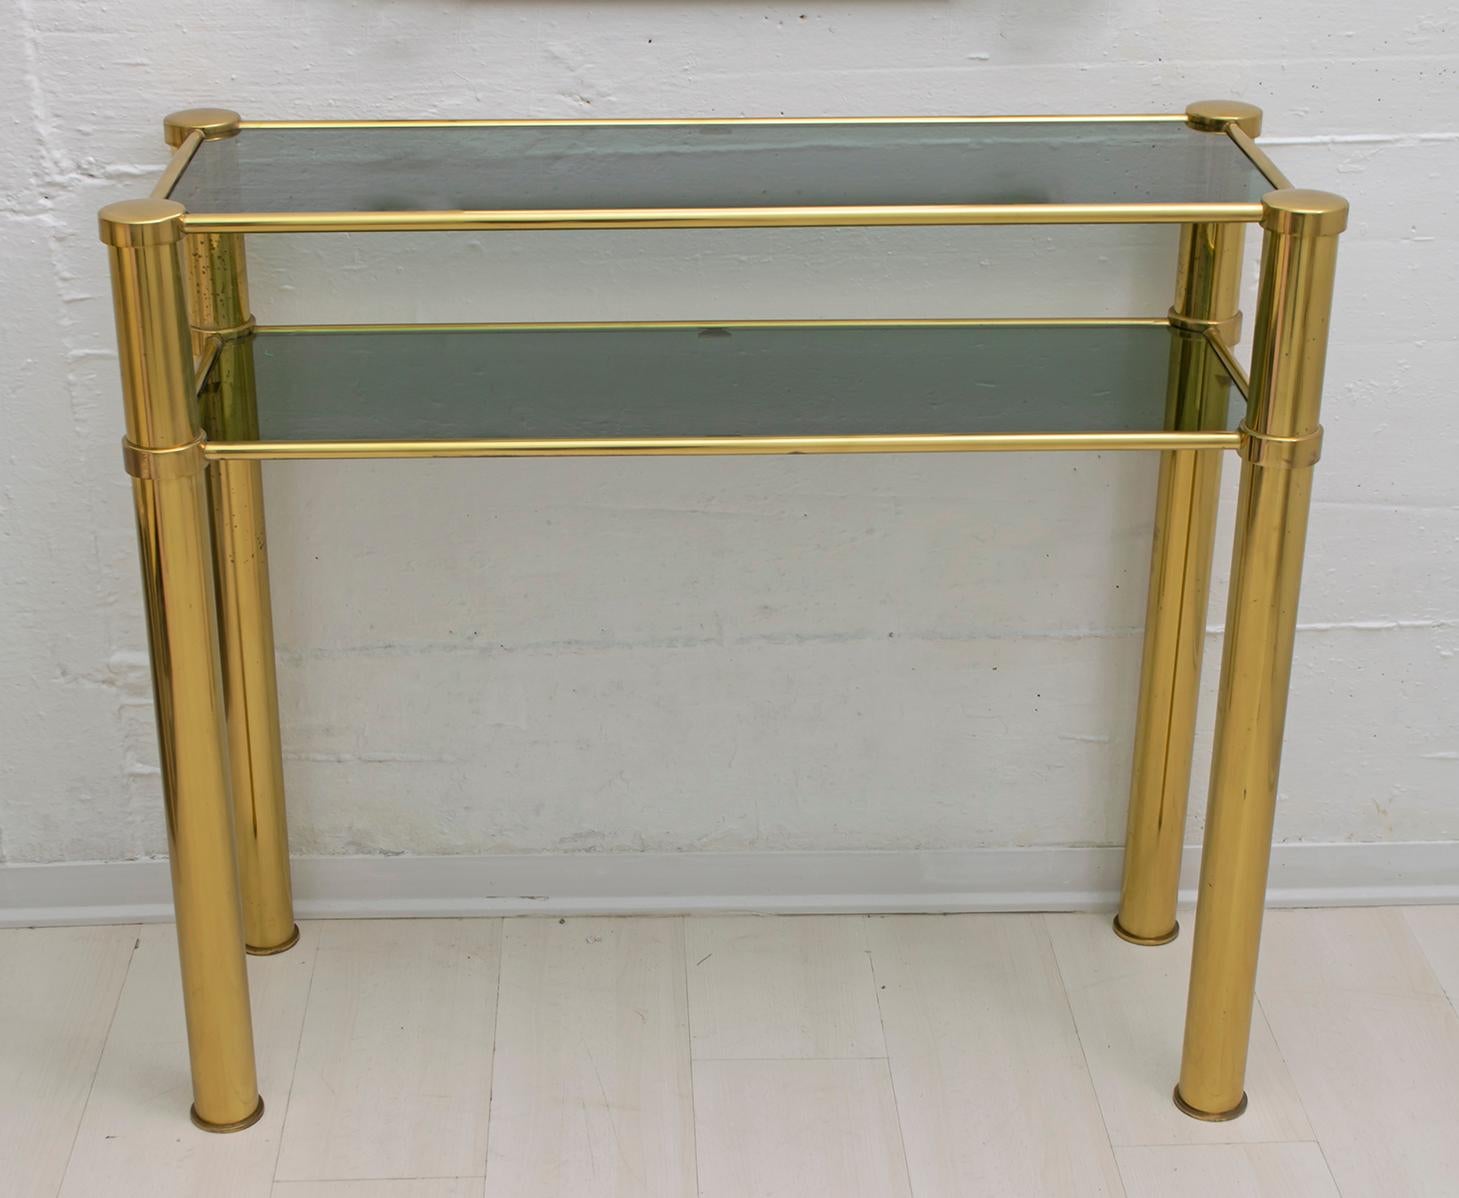 Mid-Century Modern brass console with two smoked glass shelves and coordinated mirror, Italy, 1970

